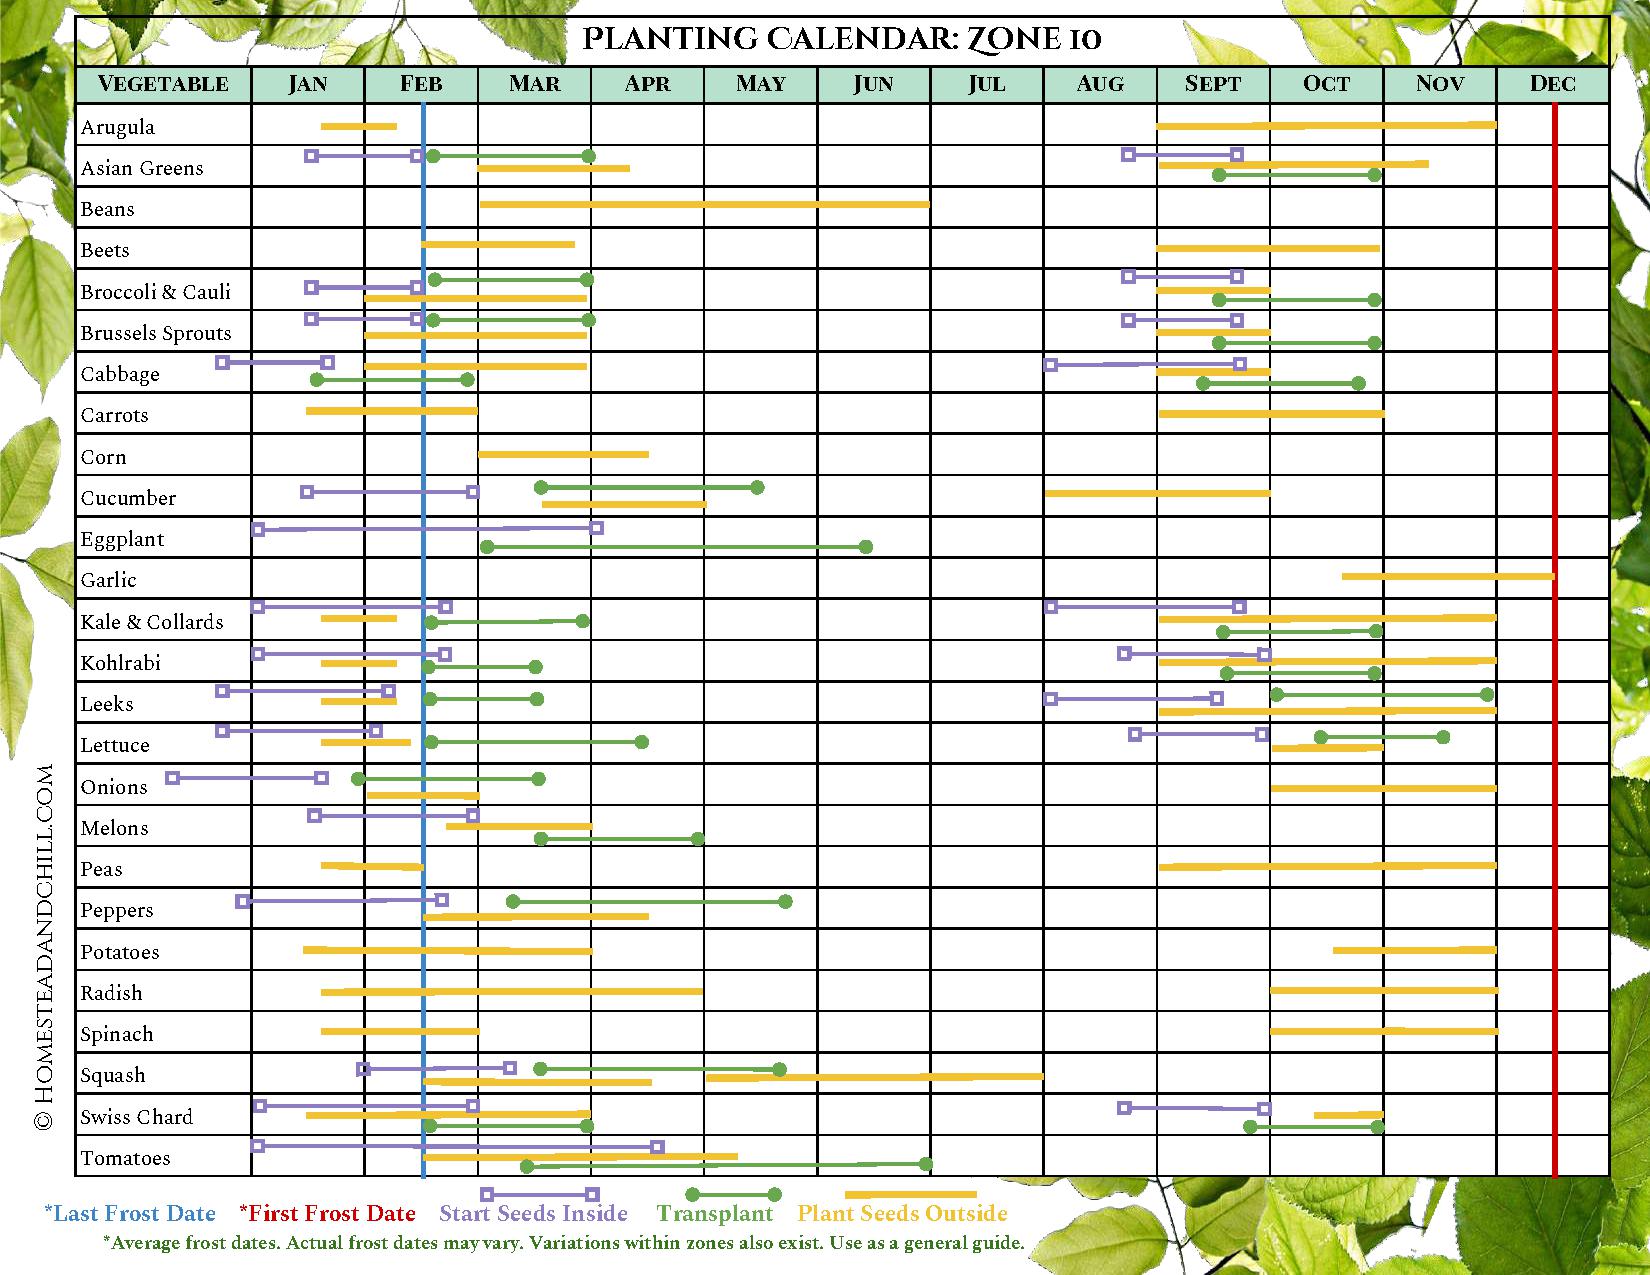 A planting calendar for Zone 10, it has many different vegetables lined up on the left side of the chart and all of the months of the year listed on the top of the chart. Each vegetable has different colored lines that correspond with when to start seeds inside, transplant outdoors, and plant seeds outside, along with corresponding last frost date and first frost date where applicable. The lines start left to right, showing what months you should do each particular task depending on the season and where you live.